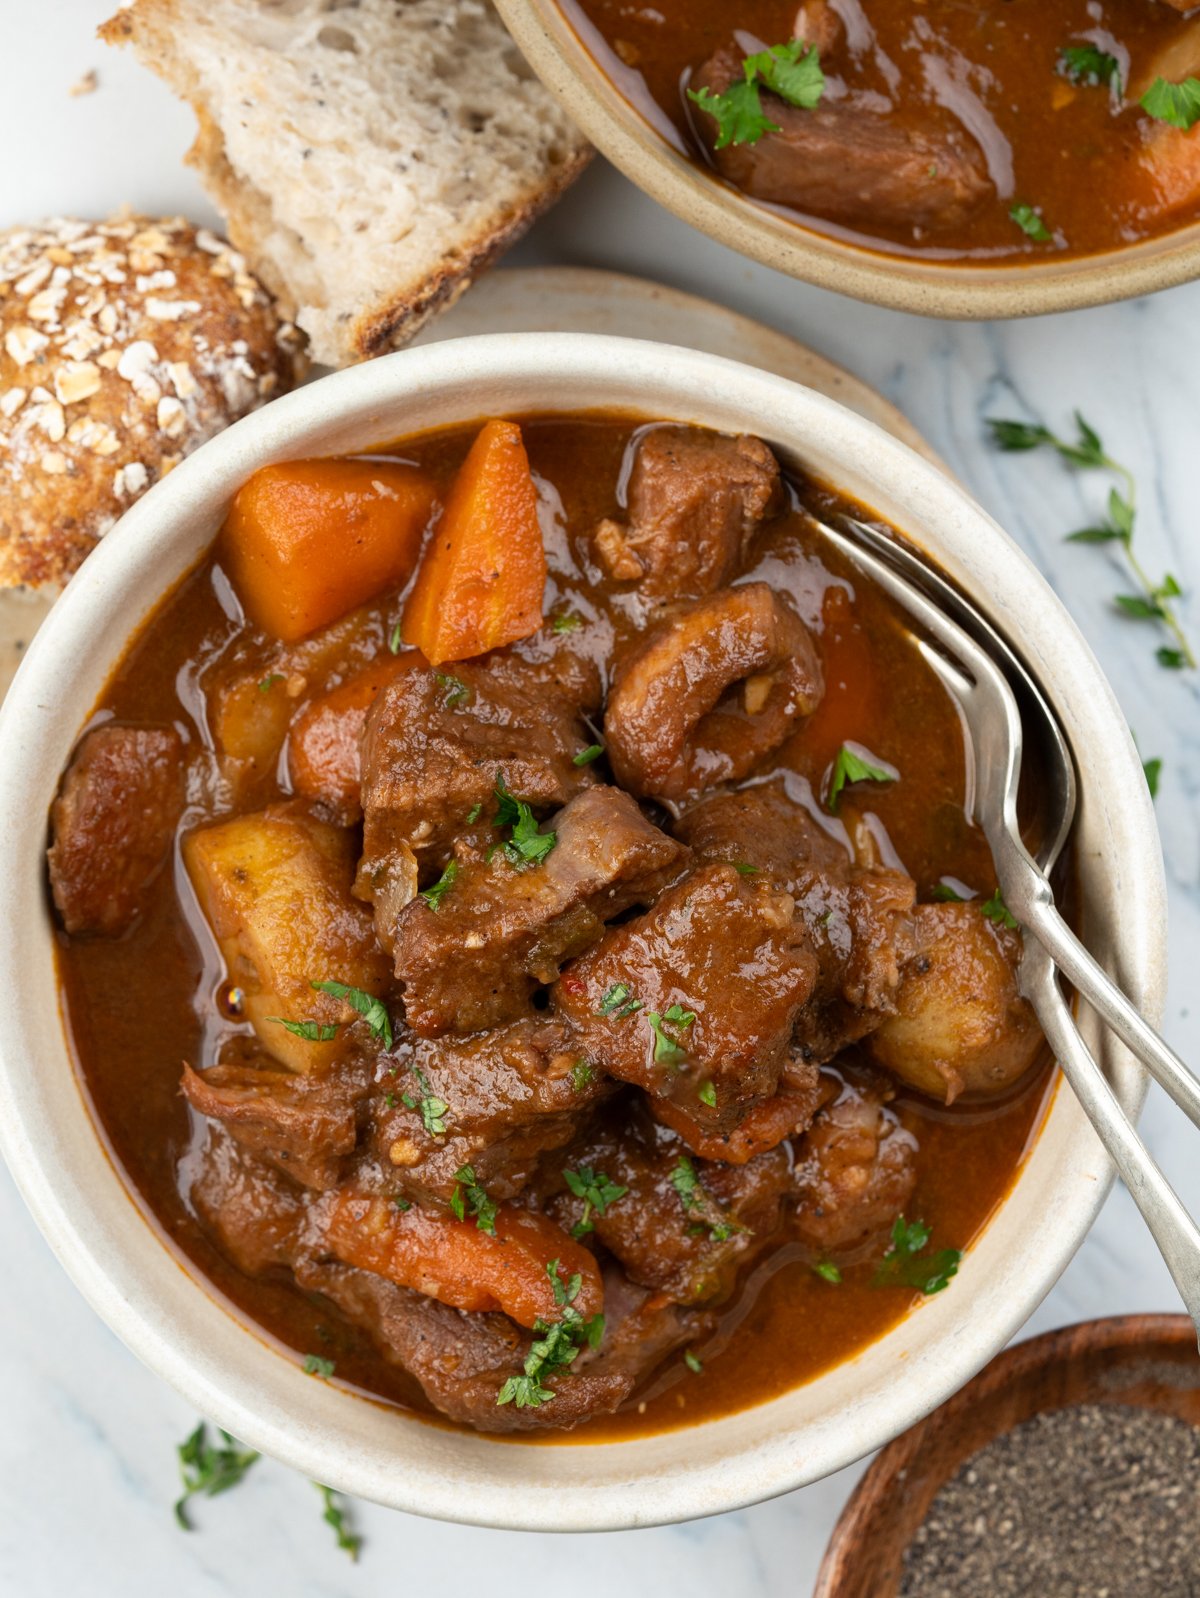 Slow-cooker lamb stew with tender, fall-apart lamb chunks, potatoes and carrot has a rustic flavourful thick broth served with bread. 